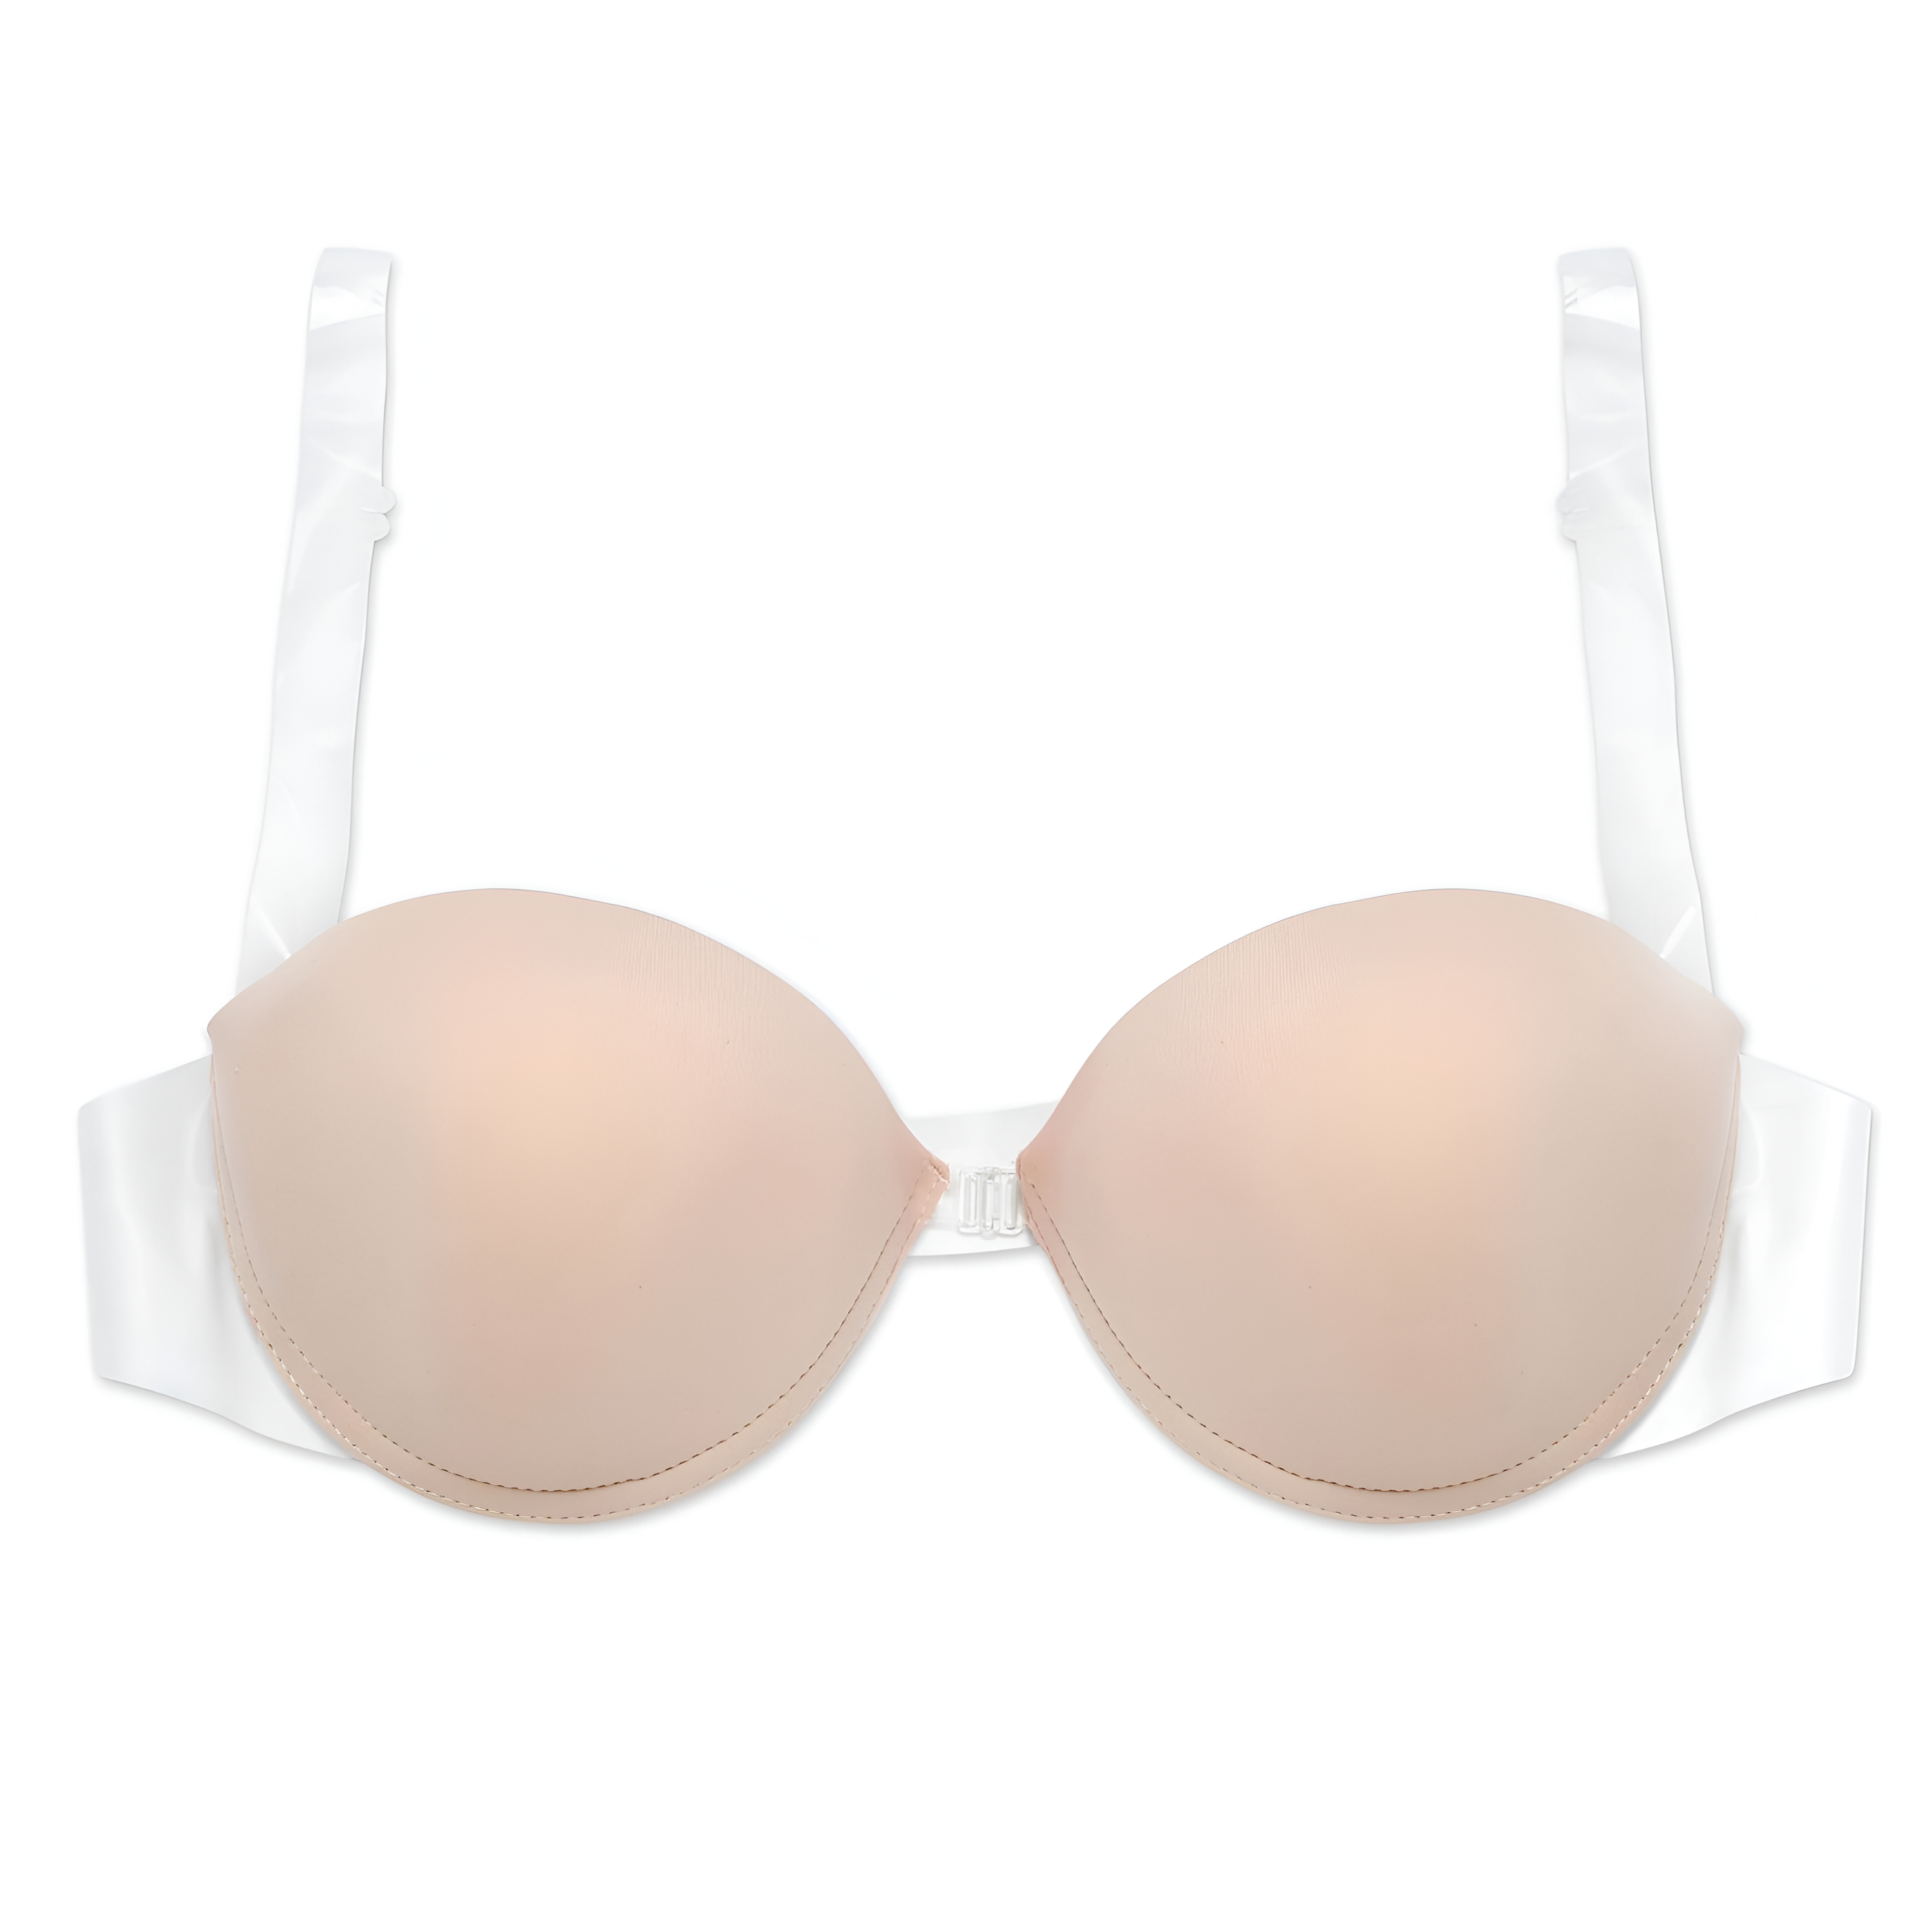 Nude bra with clear straps-AB06